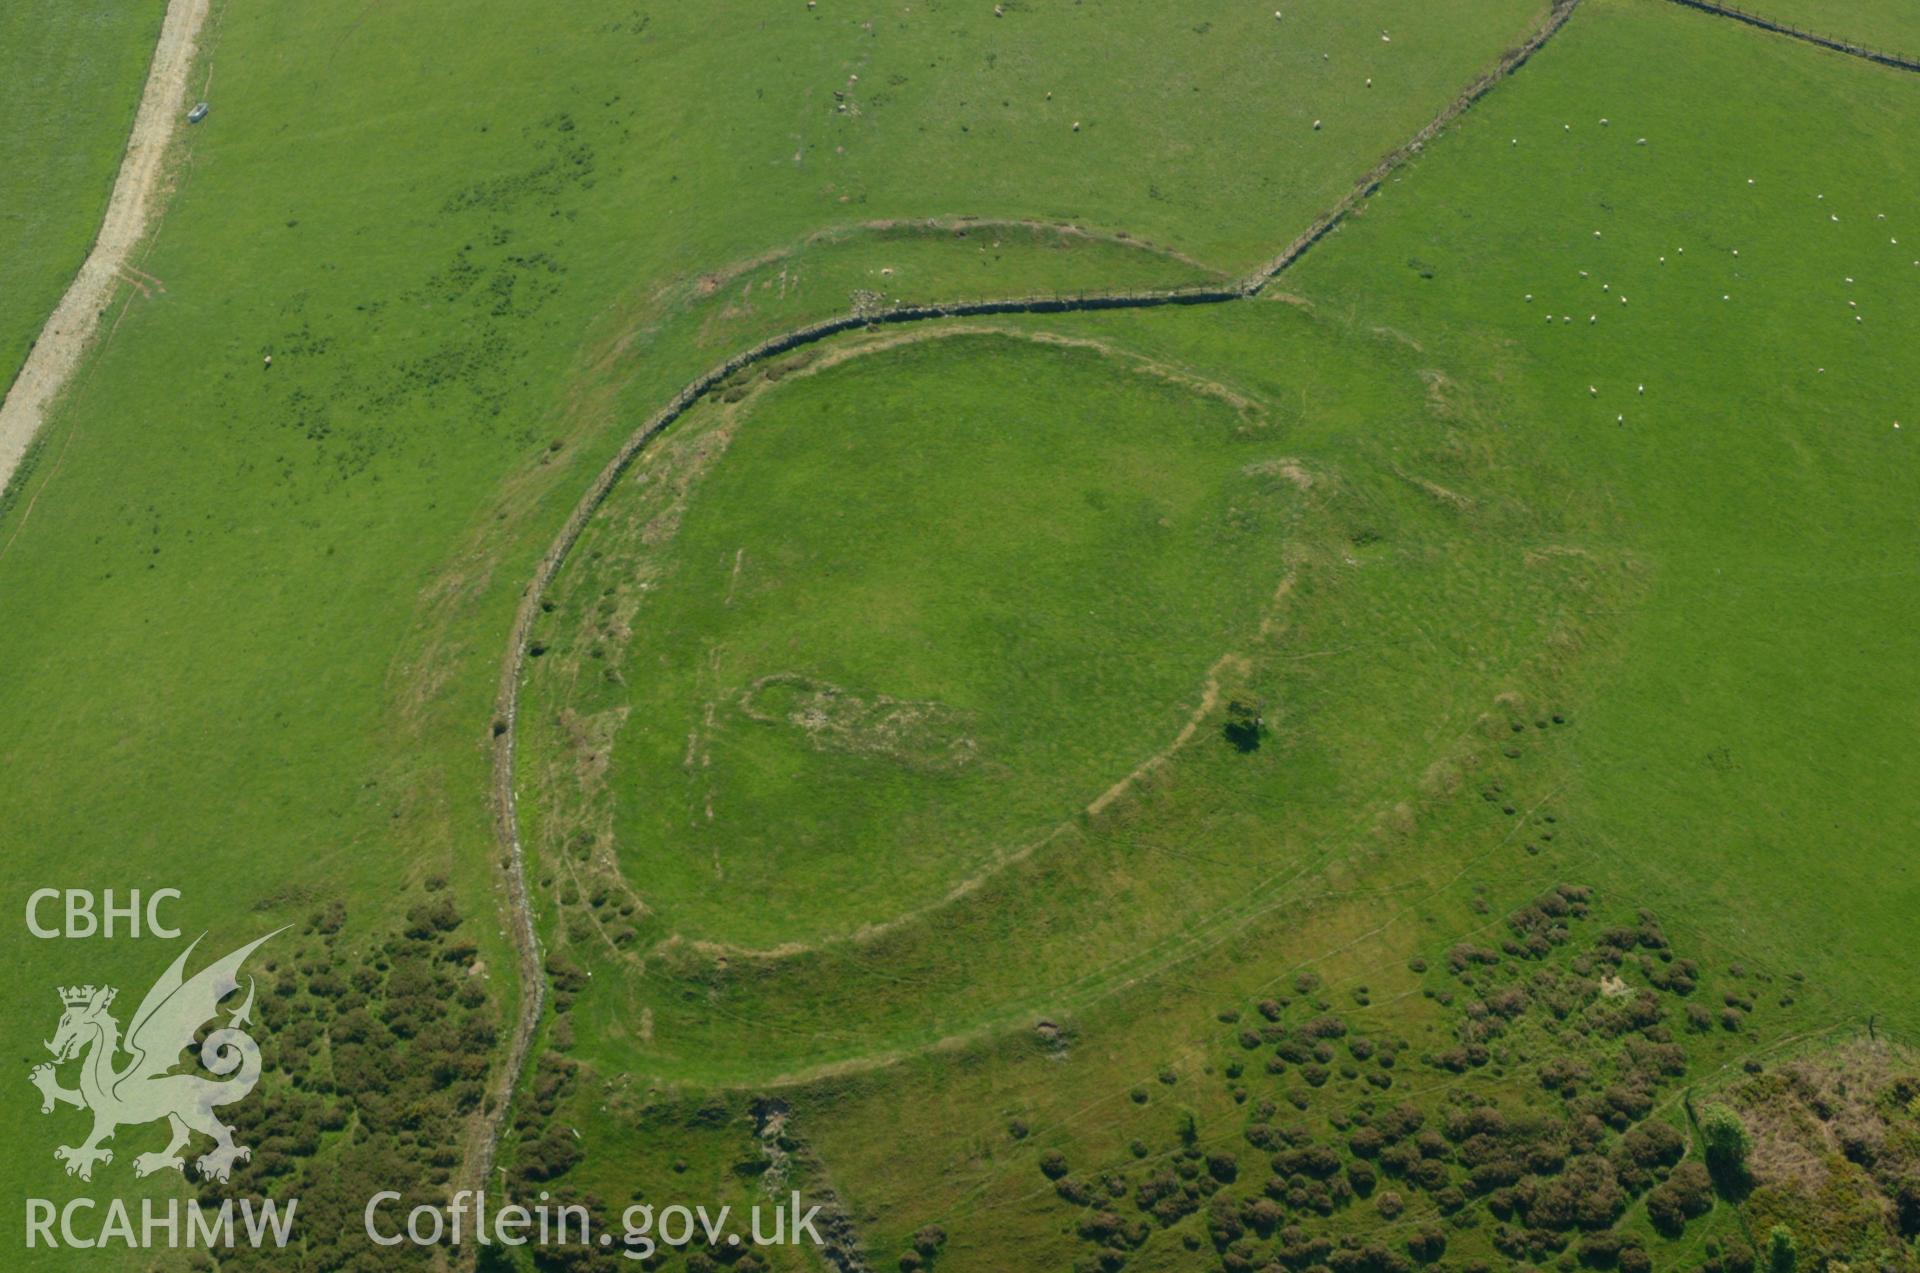 RCAHMW colour oblique aerial photograph of Castell Perth-mawr taken on 24/05/2004 by Toby Driver